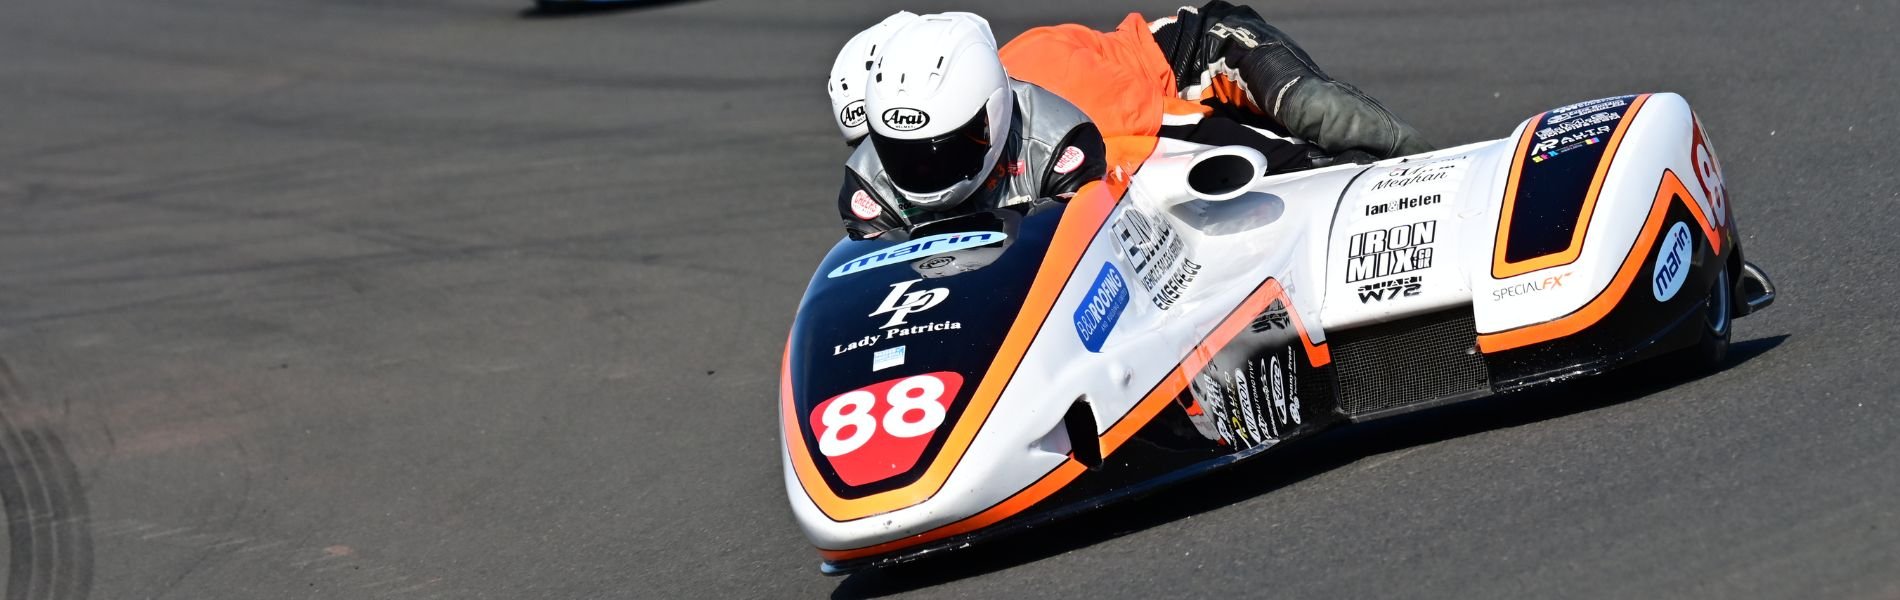 KMSC  Championship motorcycling event at Knockhill Racing Circuit - Final round - Featuring 41st anniversary Jock Taylor Race & British F1 Sidecars and FSRA British F2 Sidecars